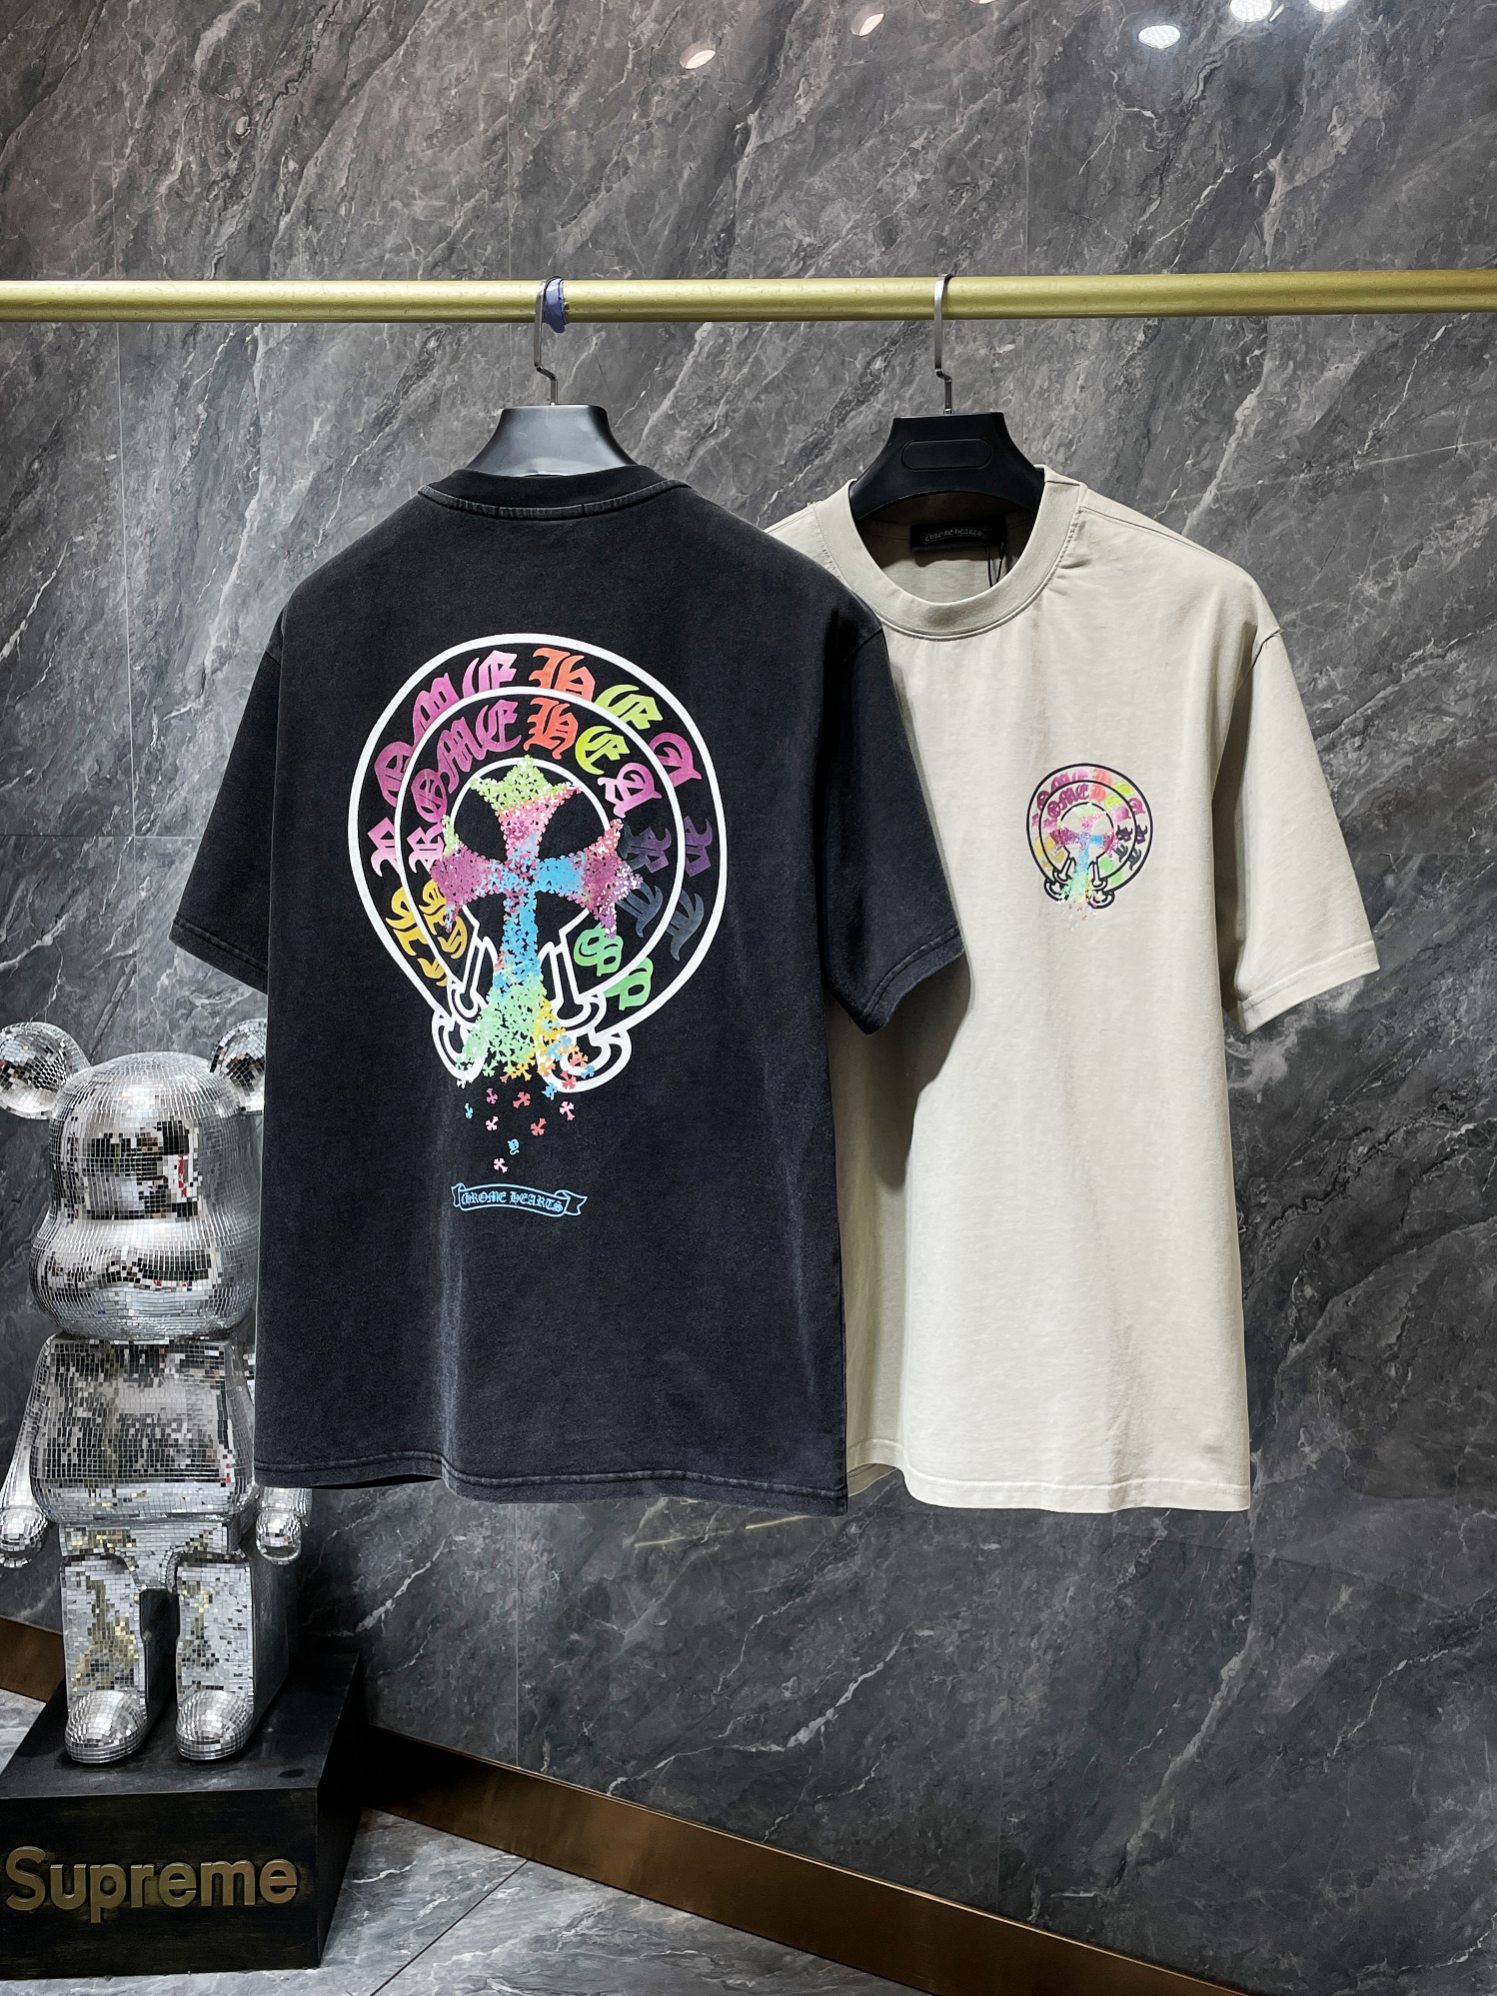 Chrome Hearts Clothing T-Shirt Best Replica 1:1
 Black White Summer Collection Short Sleeve